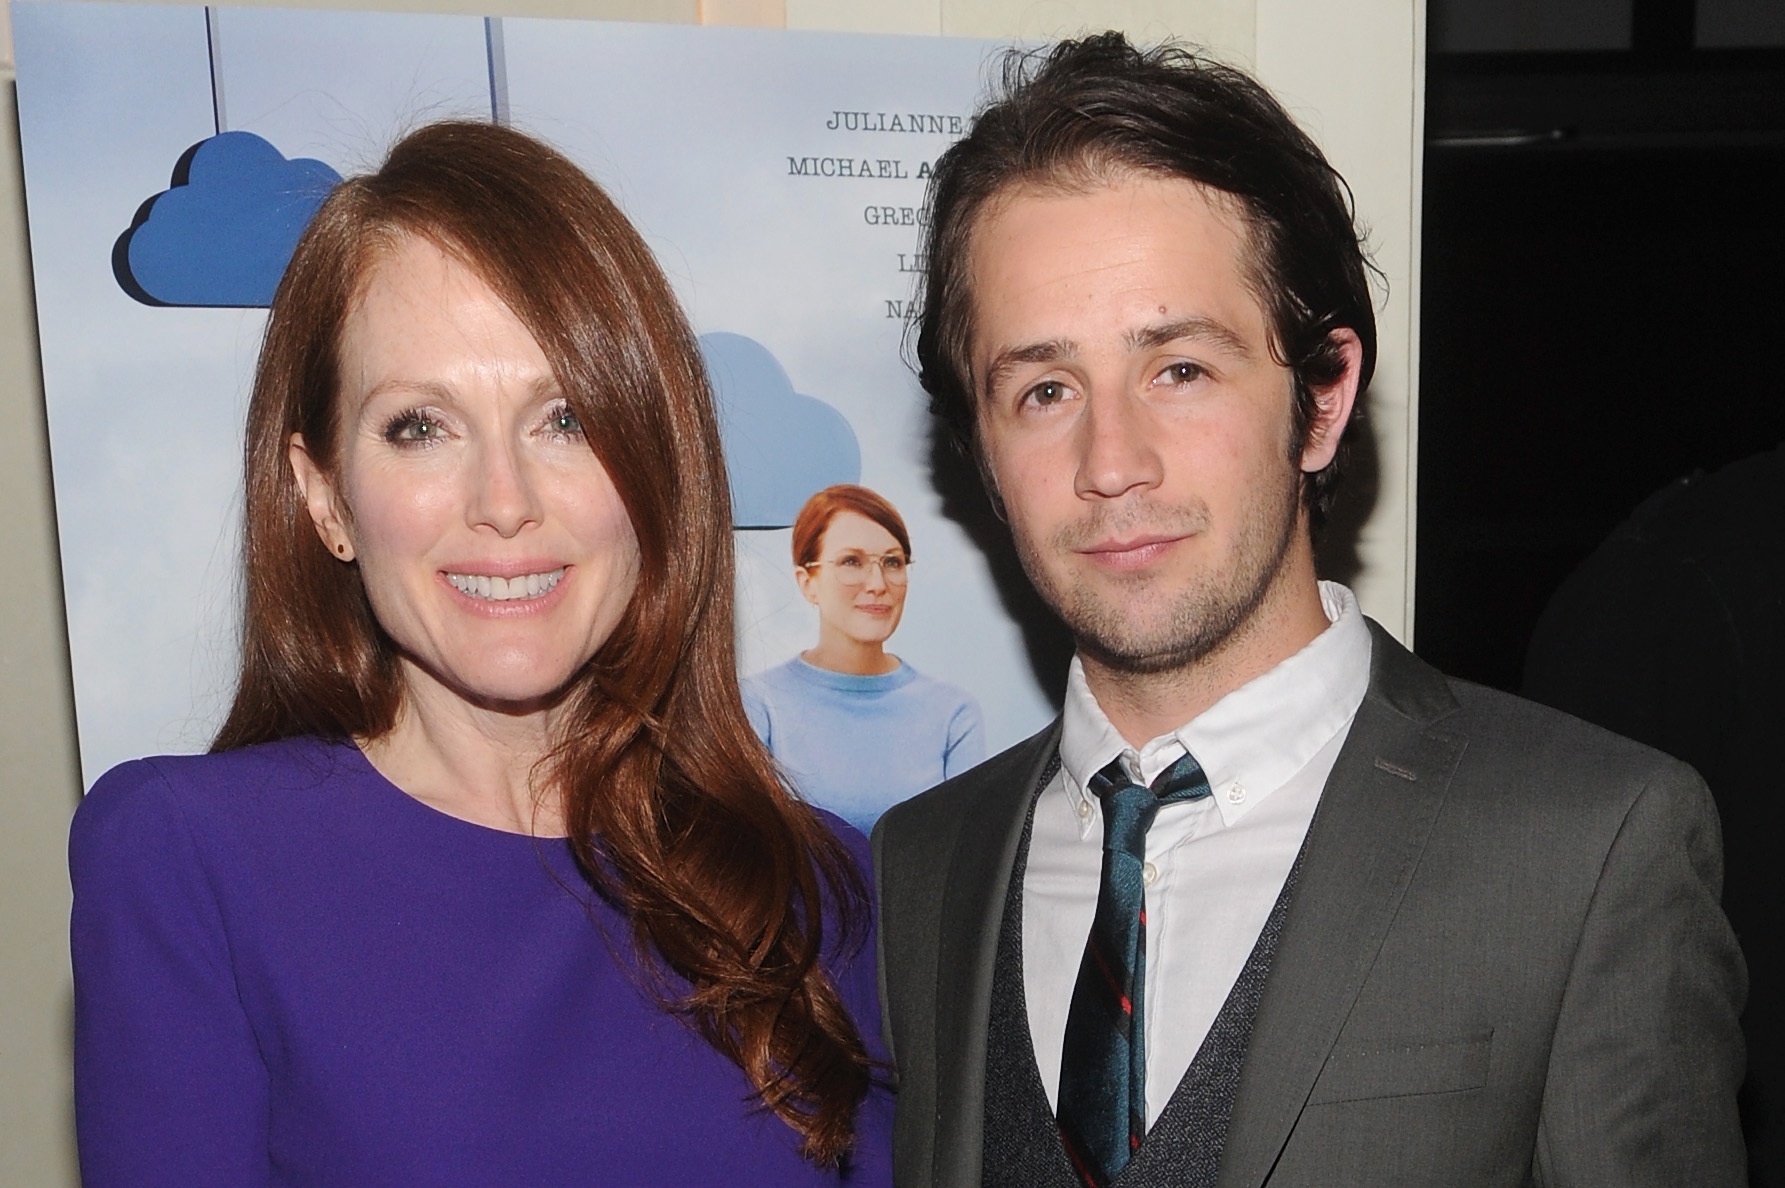 Julianne Moore and Michael Angarano at event of The English Teacher (2013)